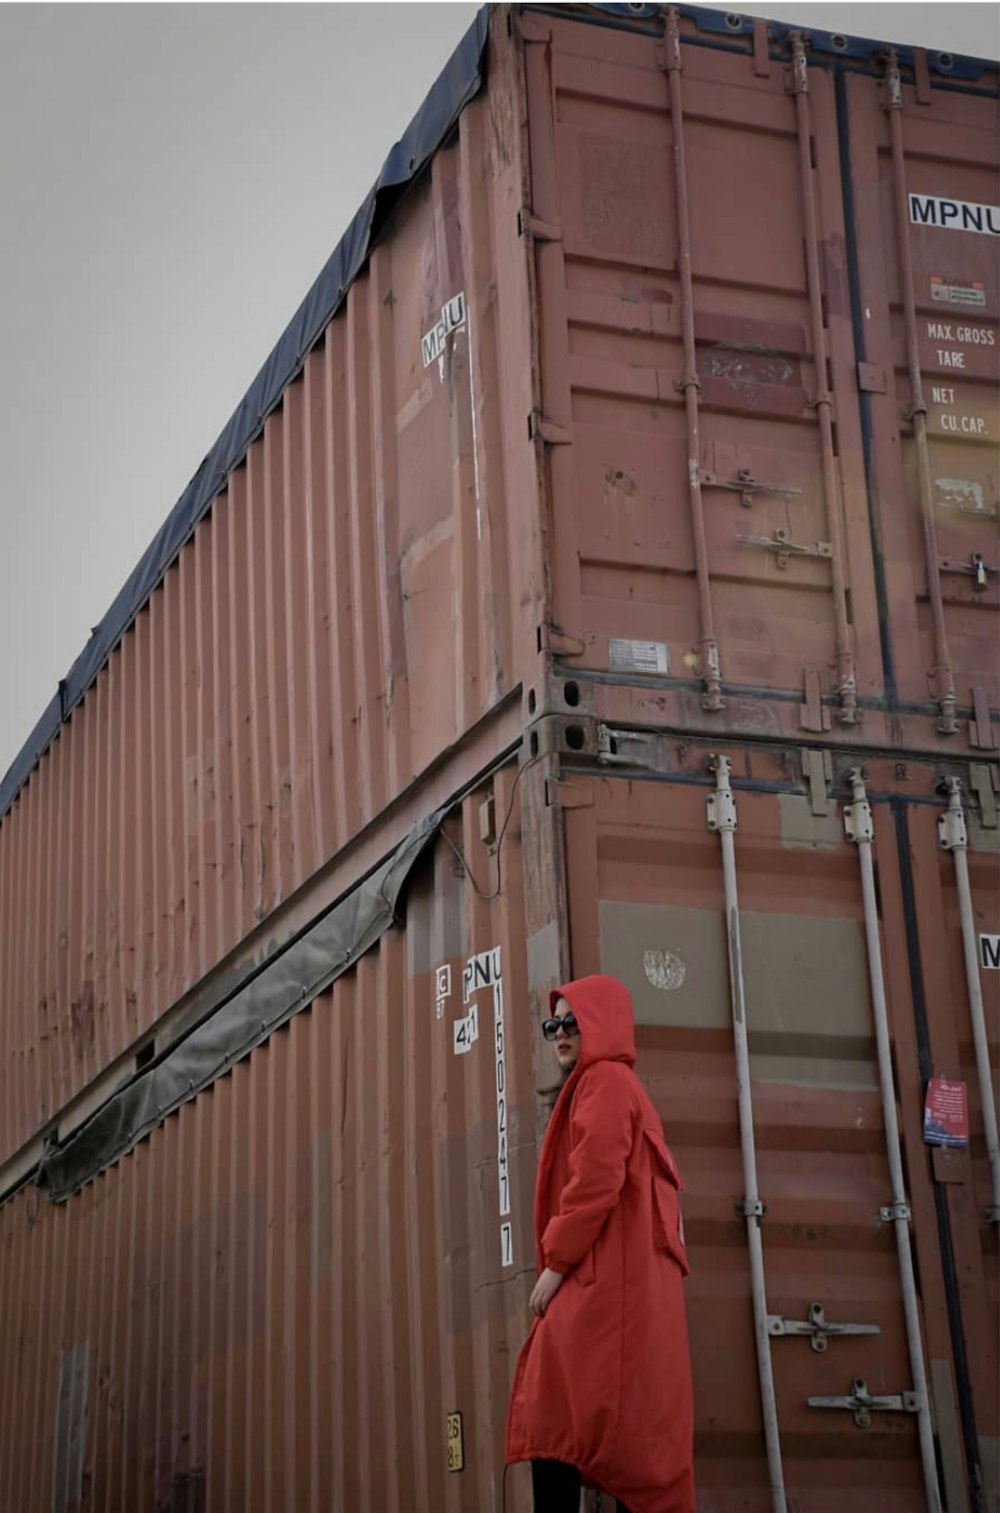 a person in a red robe standing next to a large container